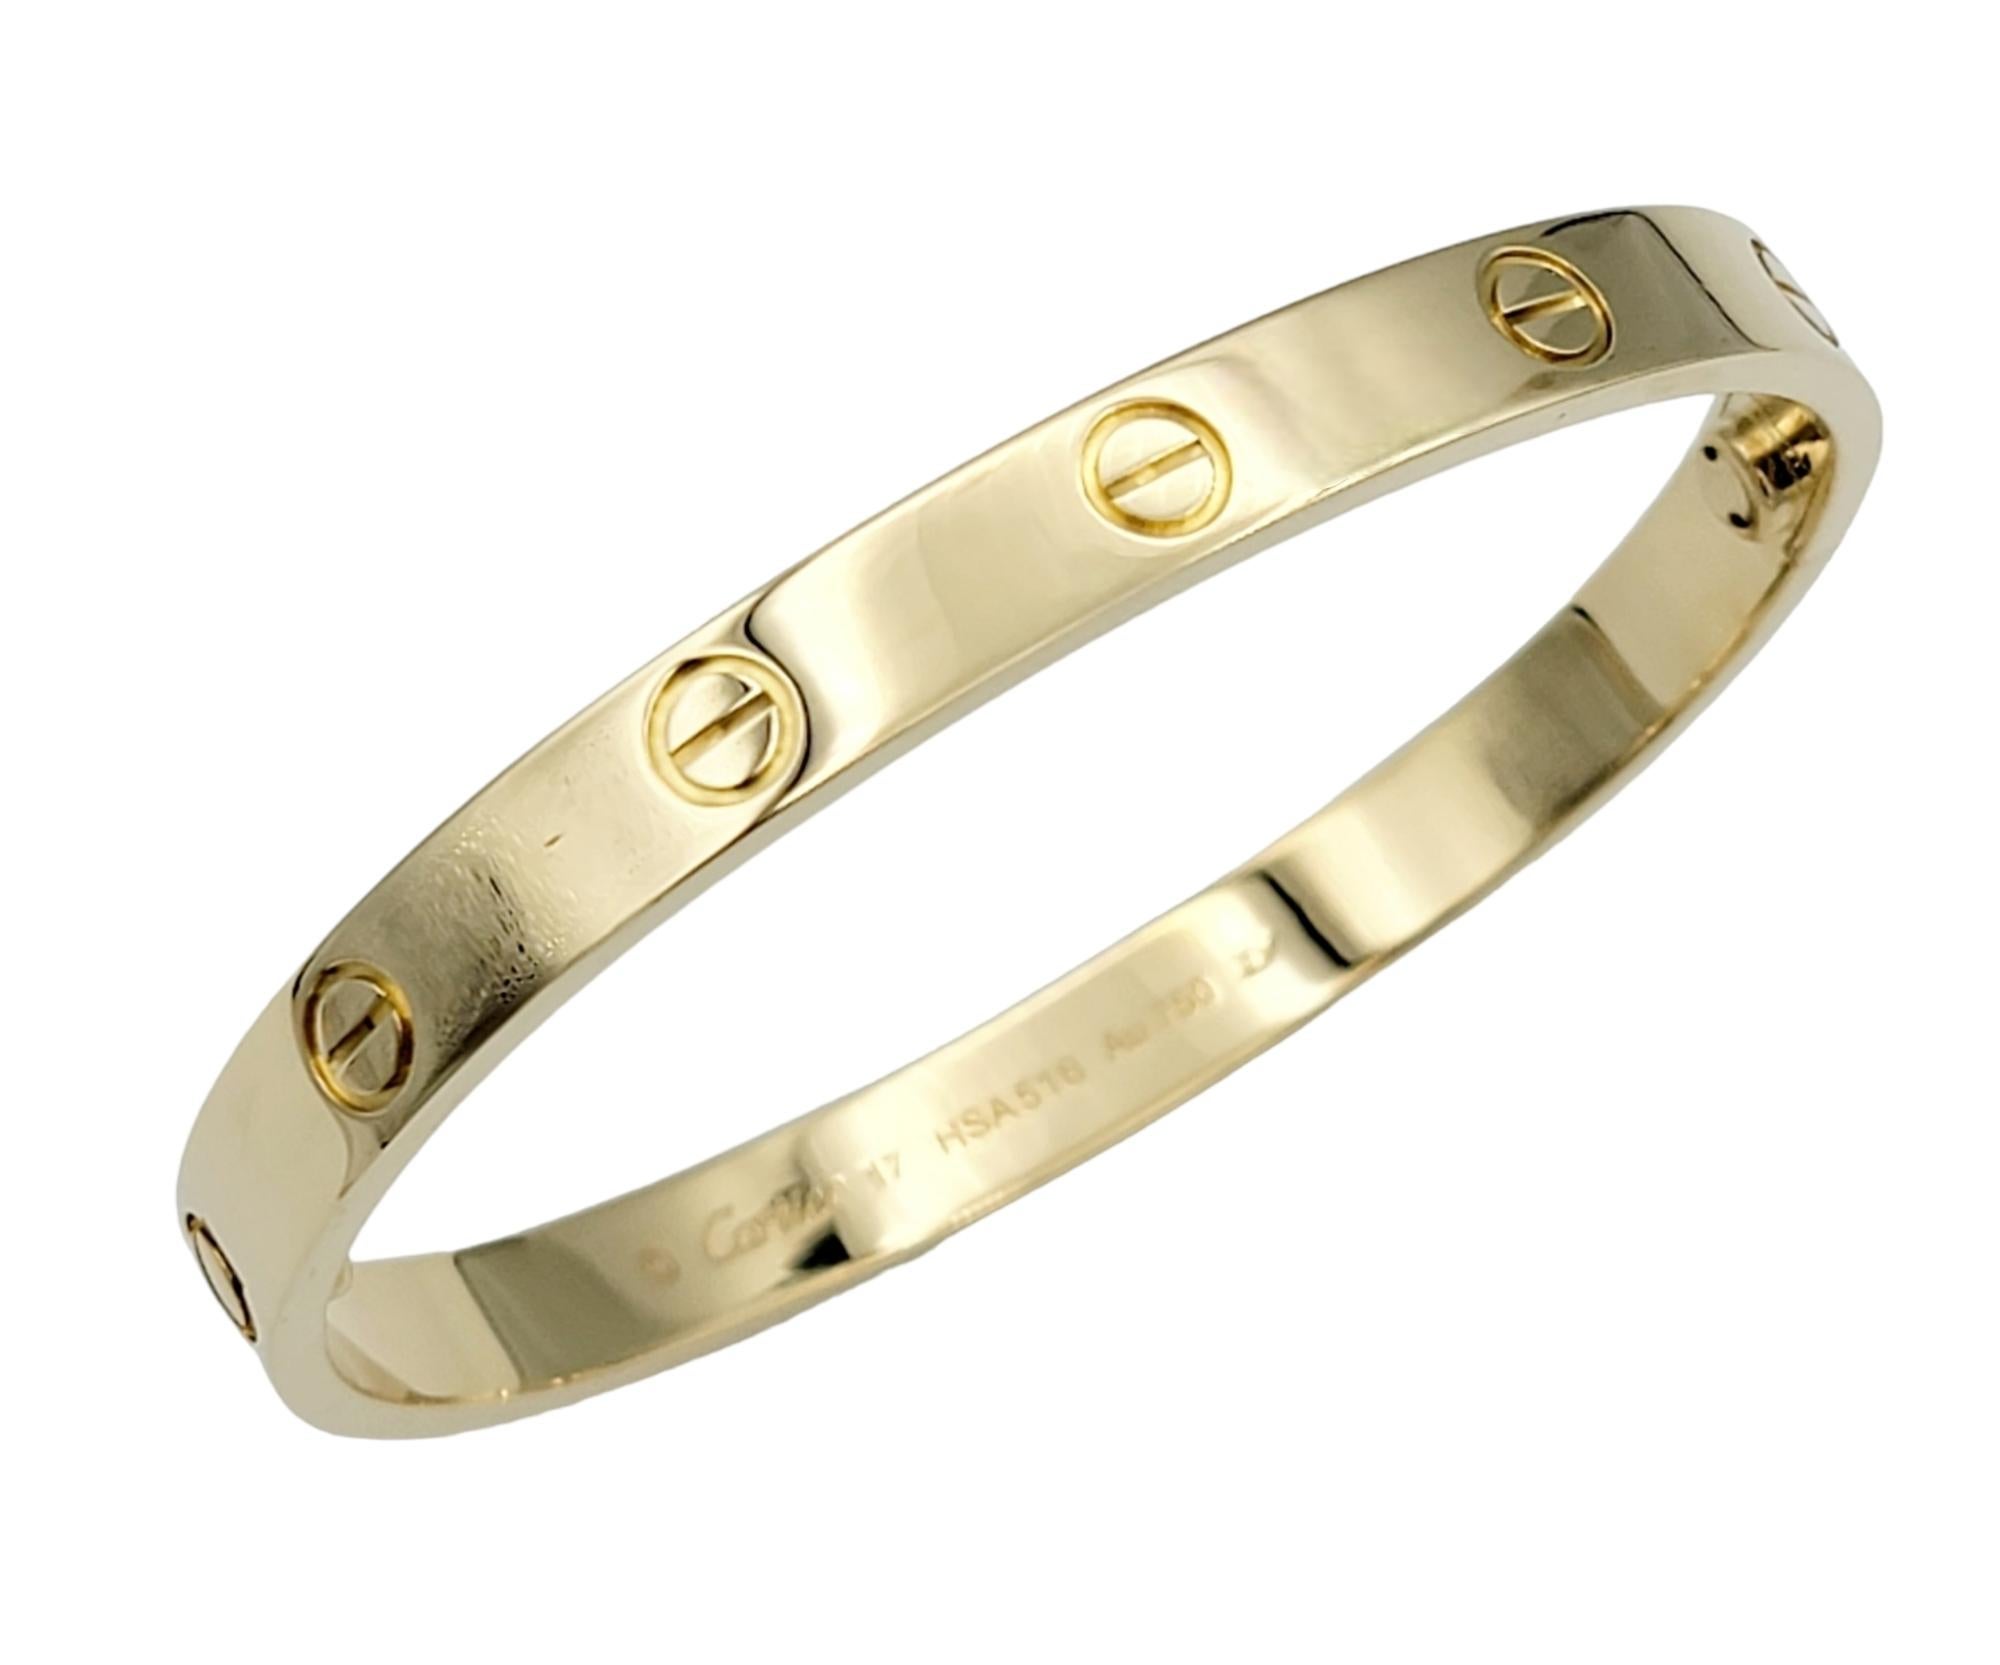 Iconic 'Love' bracelet from Cartier is the perfect everyday piece. Cartier is a French high-end luxury goods company that designs, manufactures, distributes, and sells jewelry, leather goods, and watches. It was founded by Louis-François Cartier in